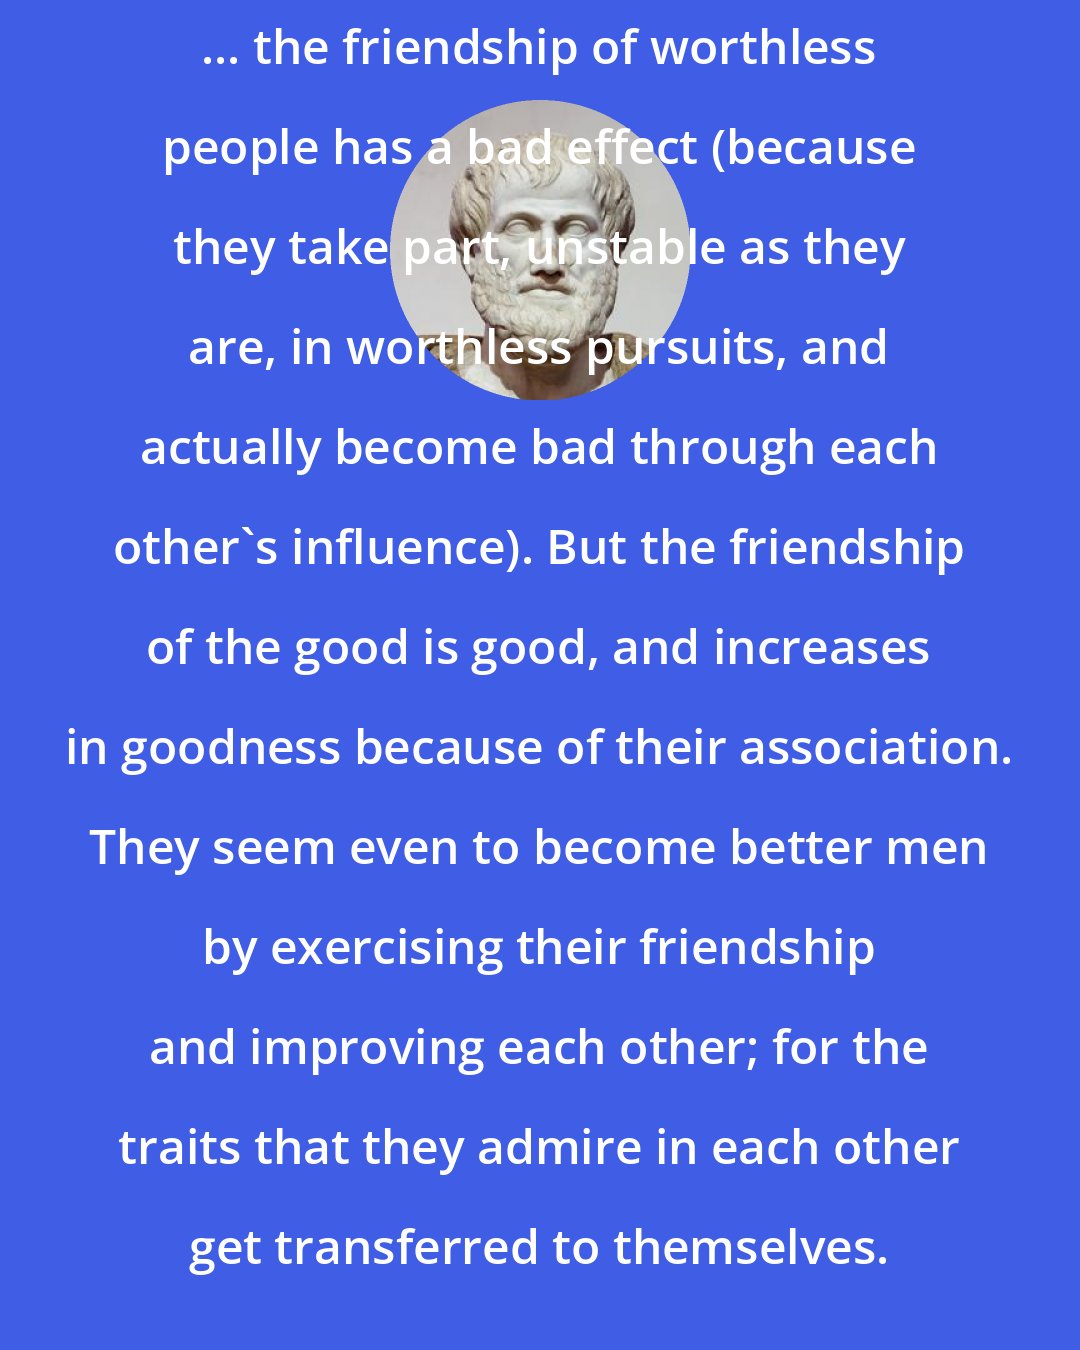 Aristotle: ... the friendship of worthless people has a bad effect (because they take part, unstable as they are, in worthless pursuits, and actually become bad through each other's influence). But the friendship of the good is good, and increases in goodness because of their association. They seem even to become better men by exercising their friendship and improving each other; for the traits that they admire in each other get transferred to themselves.